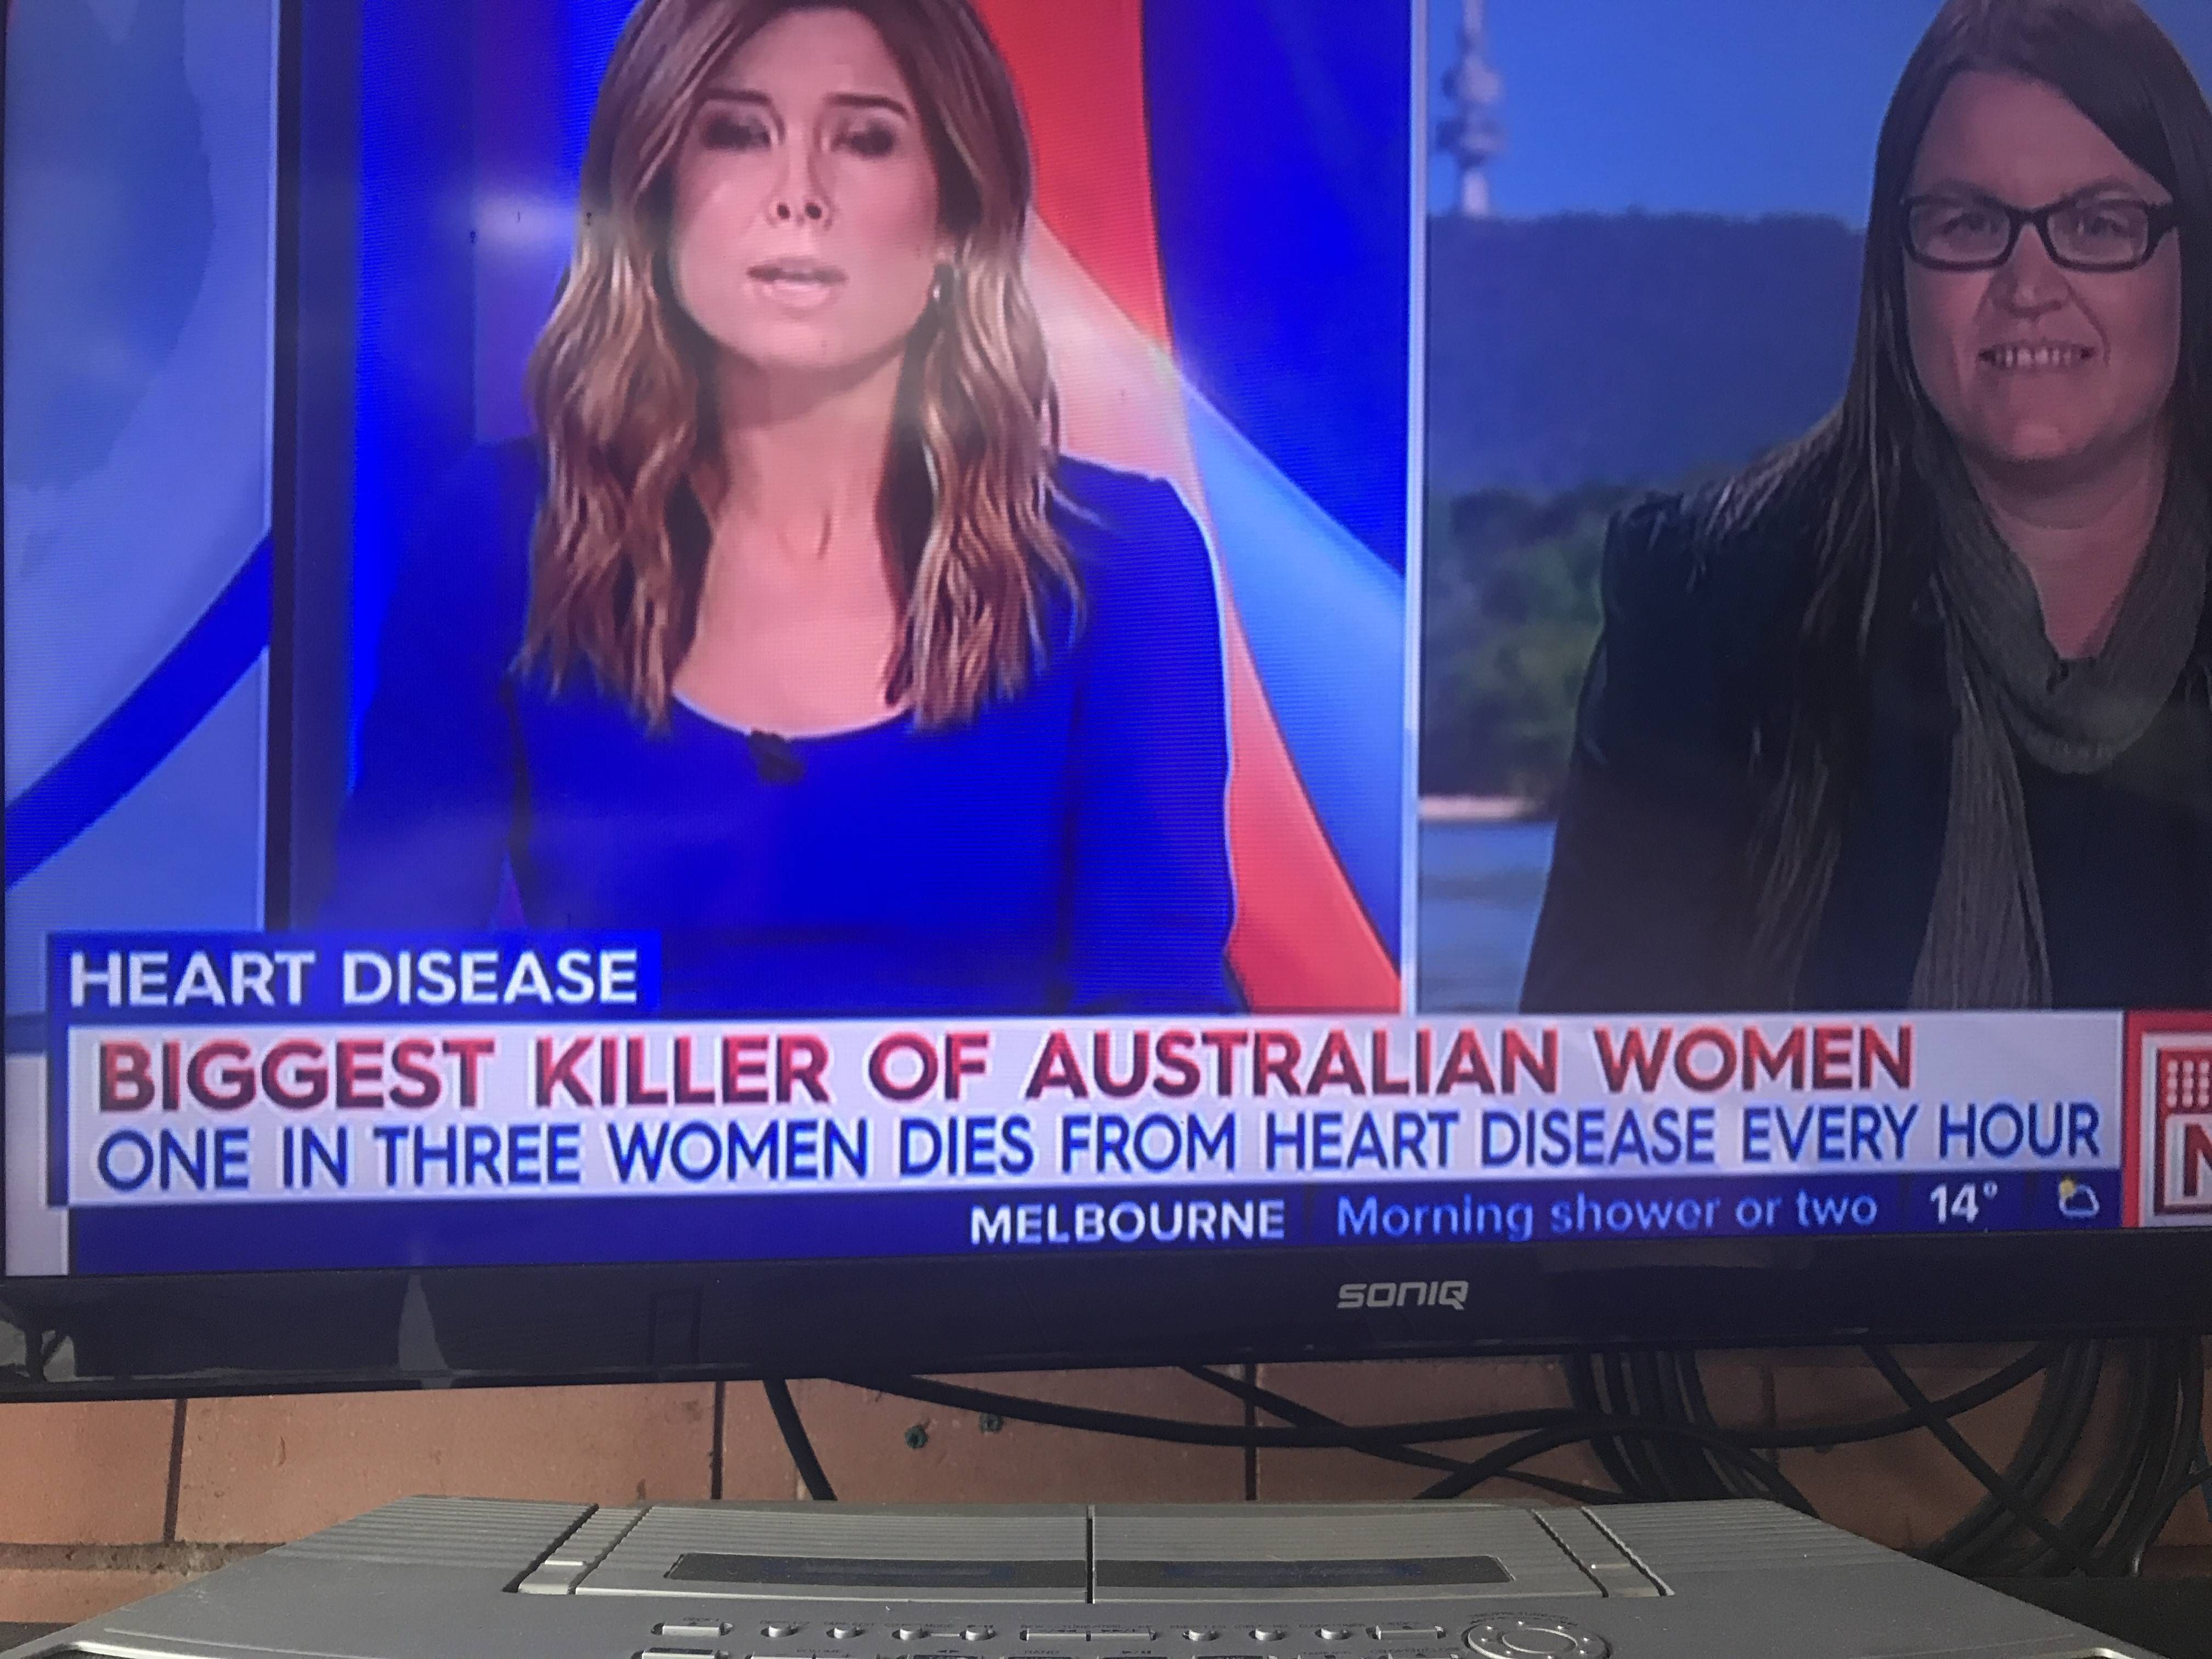 According to 9News, four million women die every hour from heart disease in Australia...